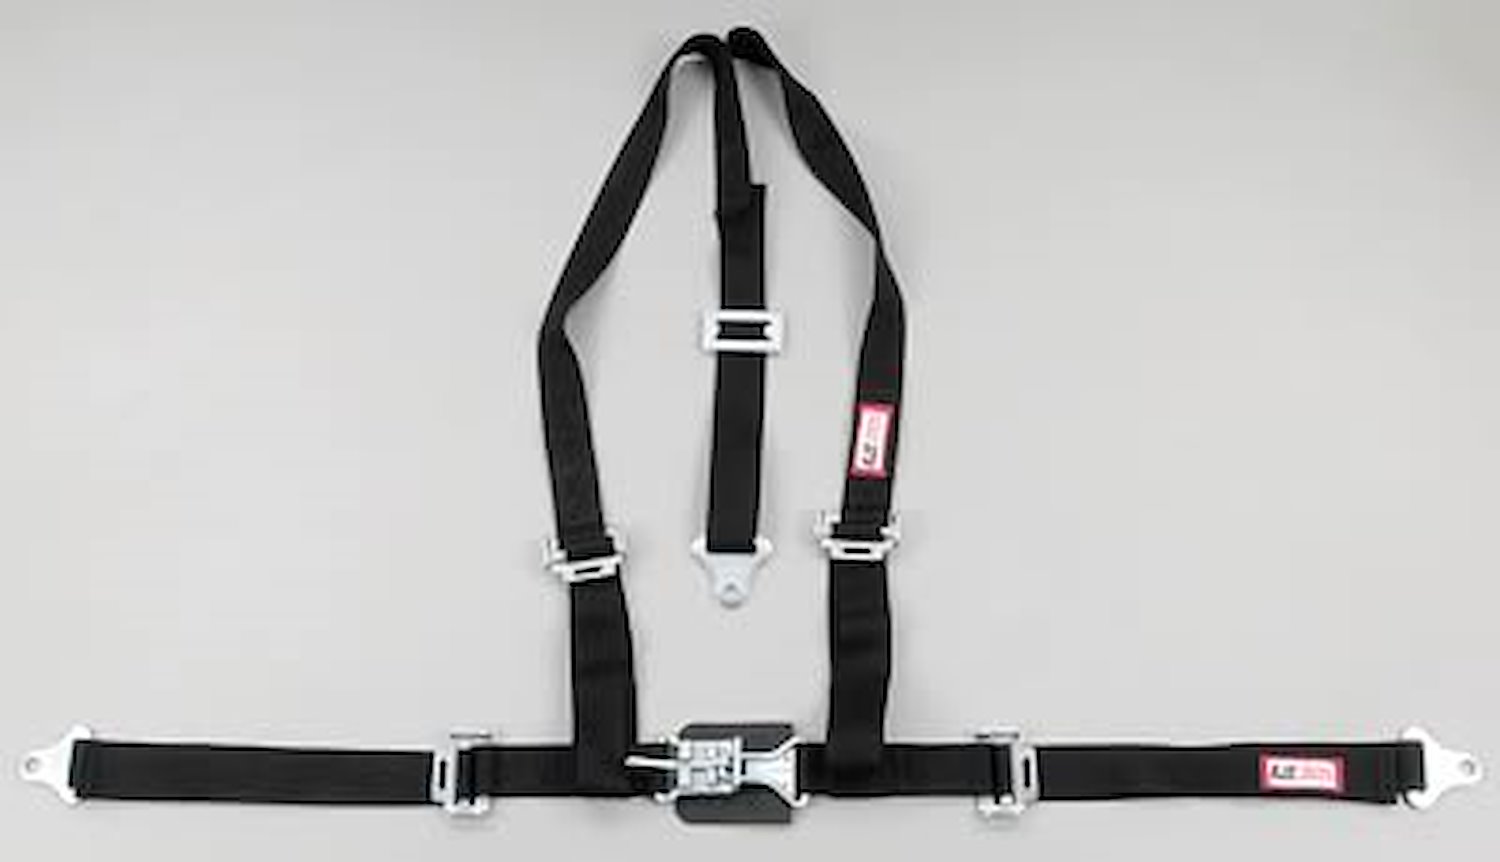 NON-SFI L&L HARNESS 2 PULL DOWN Lap Belt SEWN IN 2 S.H. V ROLL BAR Mount w/STERNUM STRAP ALL SNAP ENDS PURPLE